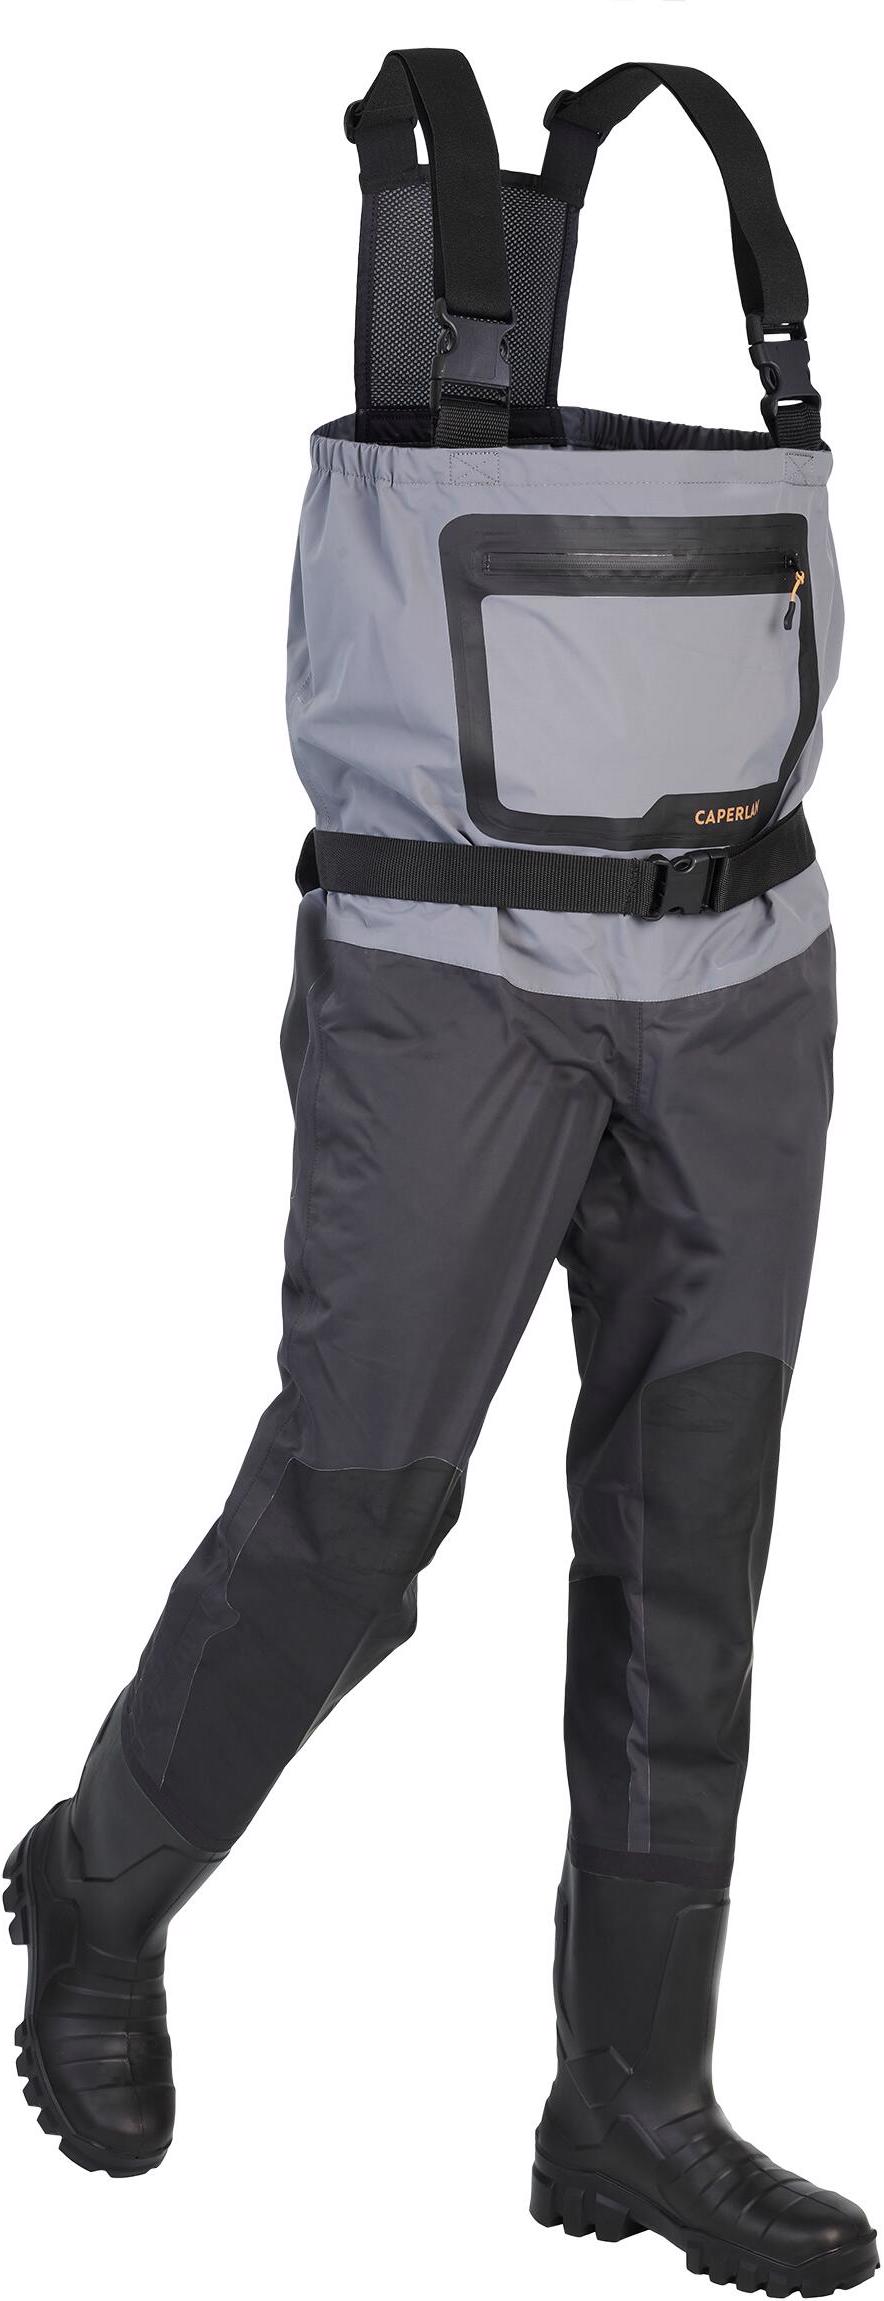 Caperlan waders 500 breathable 328836 (M) kaufen